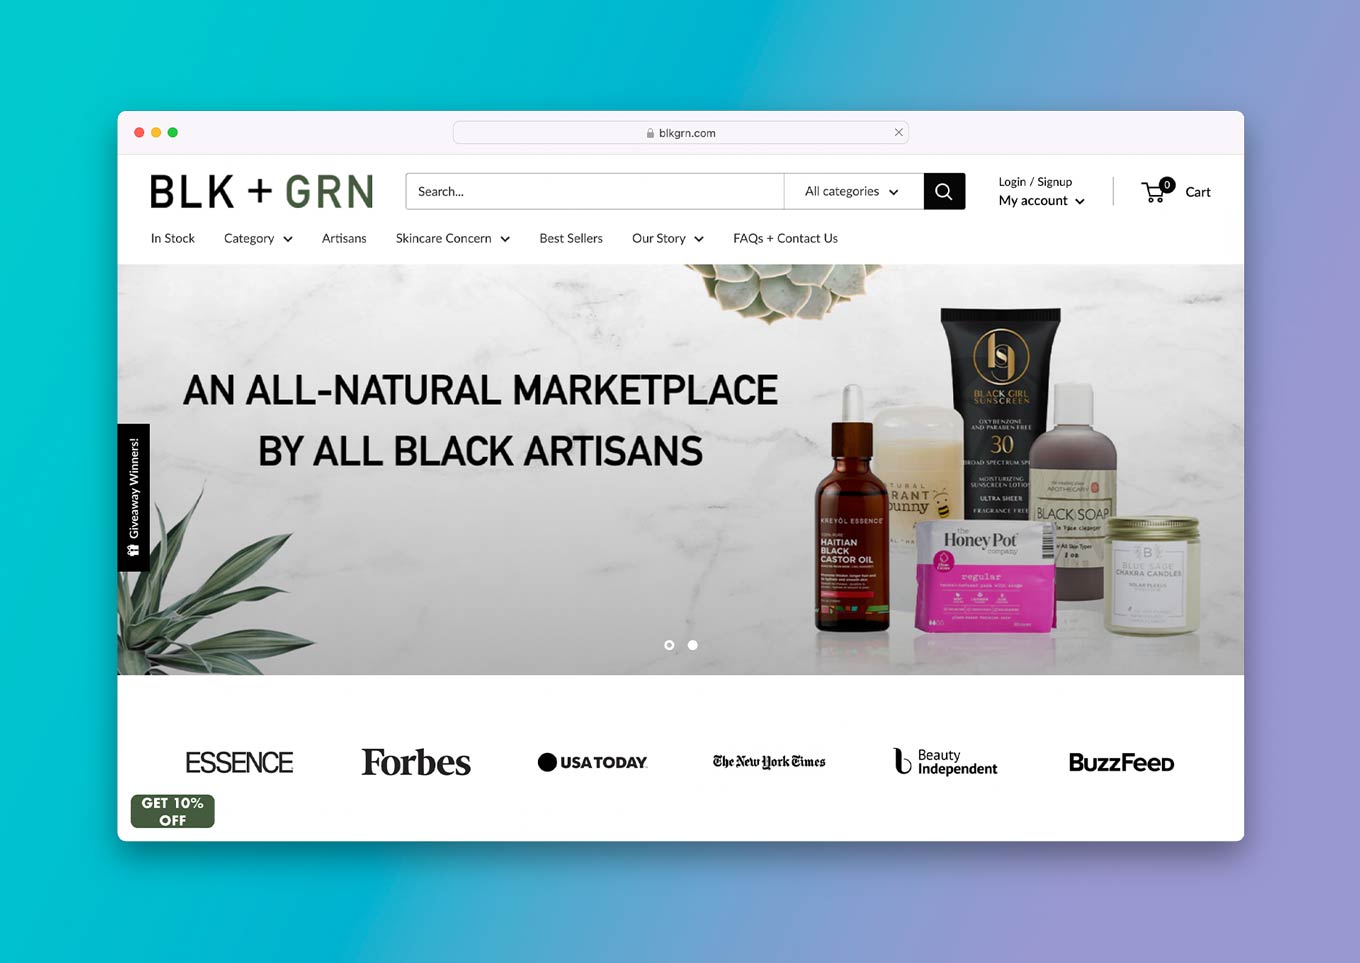 BLK + GRN Website: "An all-natural marketplace by all Black artisans"